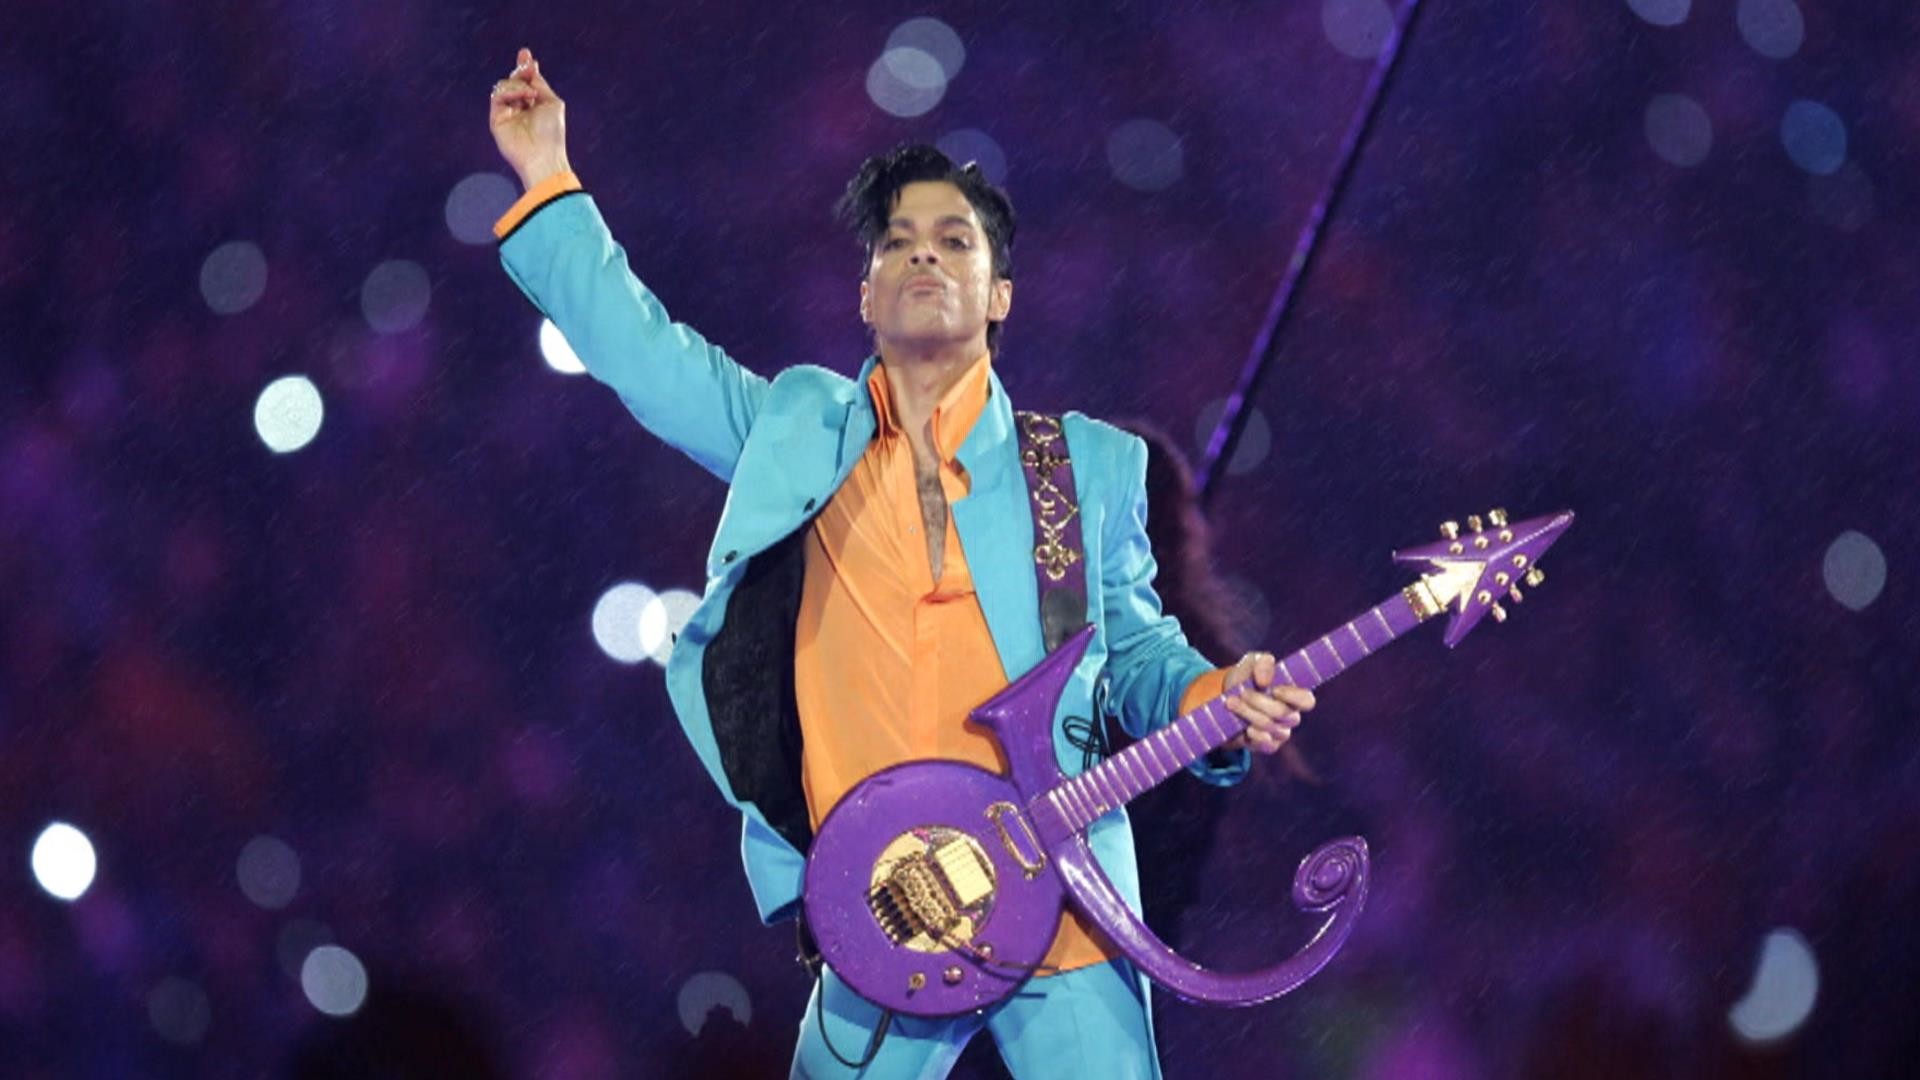 1920x1080 Prince's Mysterious Final Flight Stopped for 'Unresponsive Male': Source -  NBC News